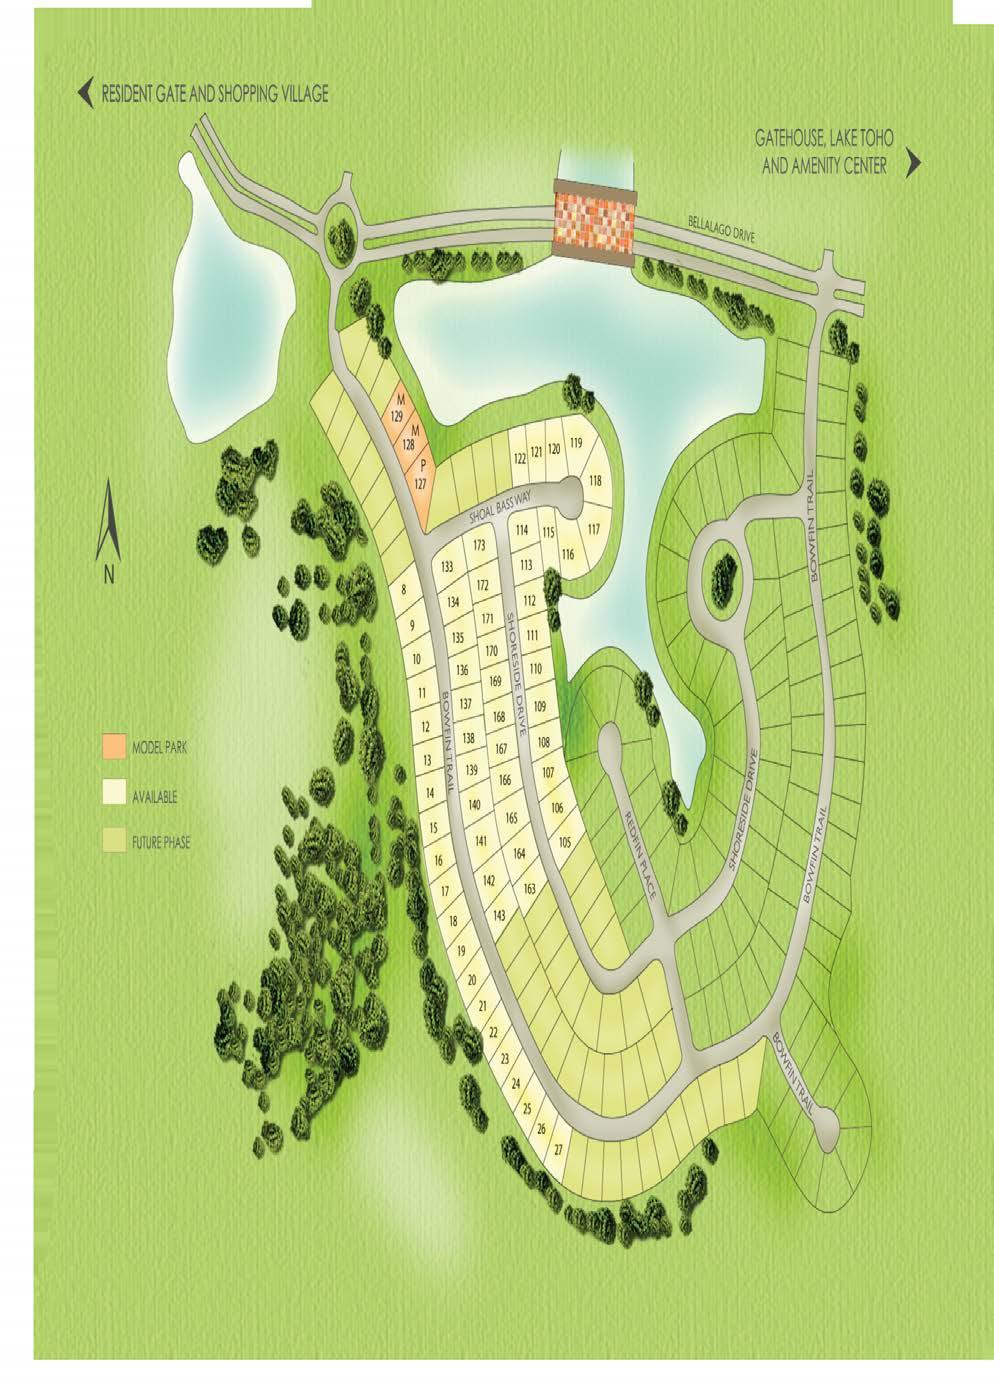 SITEMAP Edgewater at Bellalago WILL BE CONSTRUCTED OR THAT, IF CONSTRUCTED, THE NUMBER,